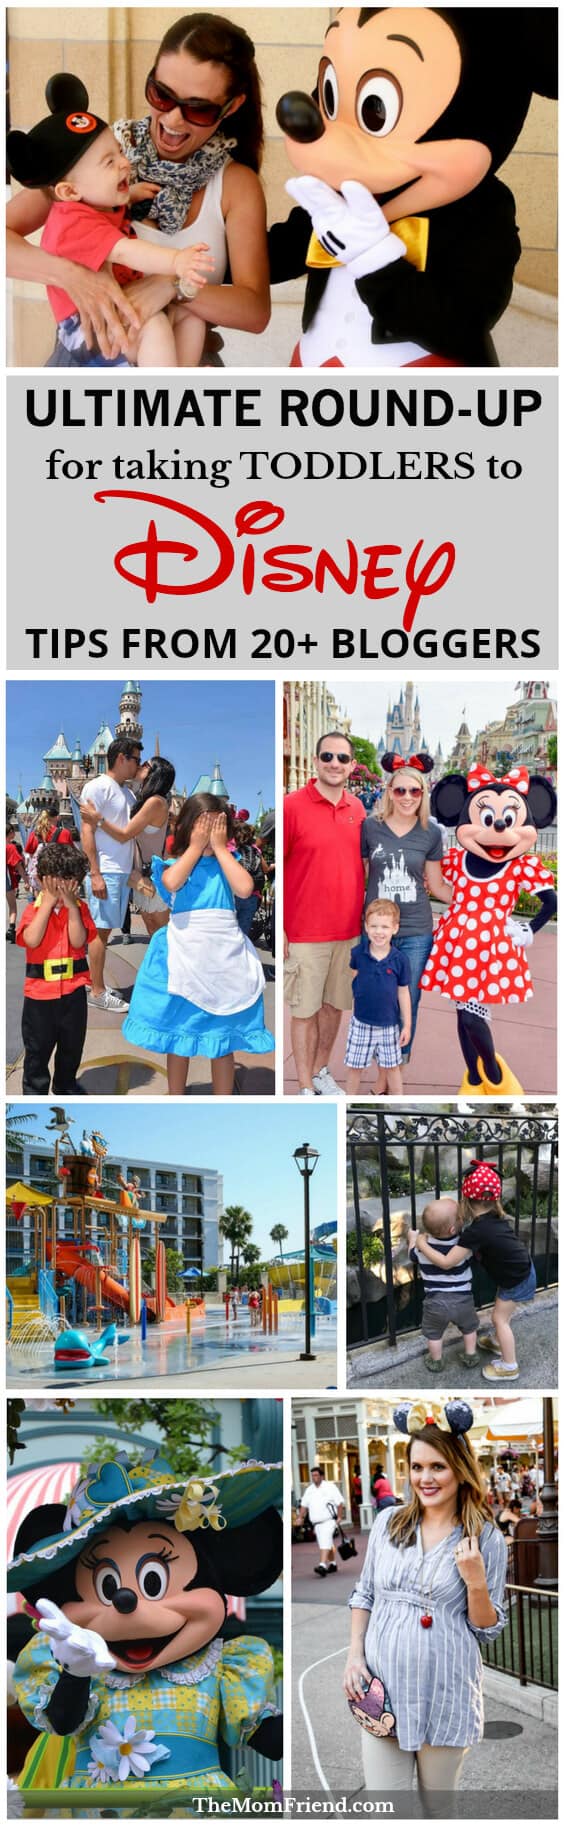 Pinnable image collage of families at Disney World.